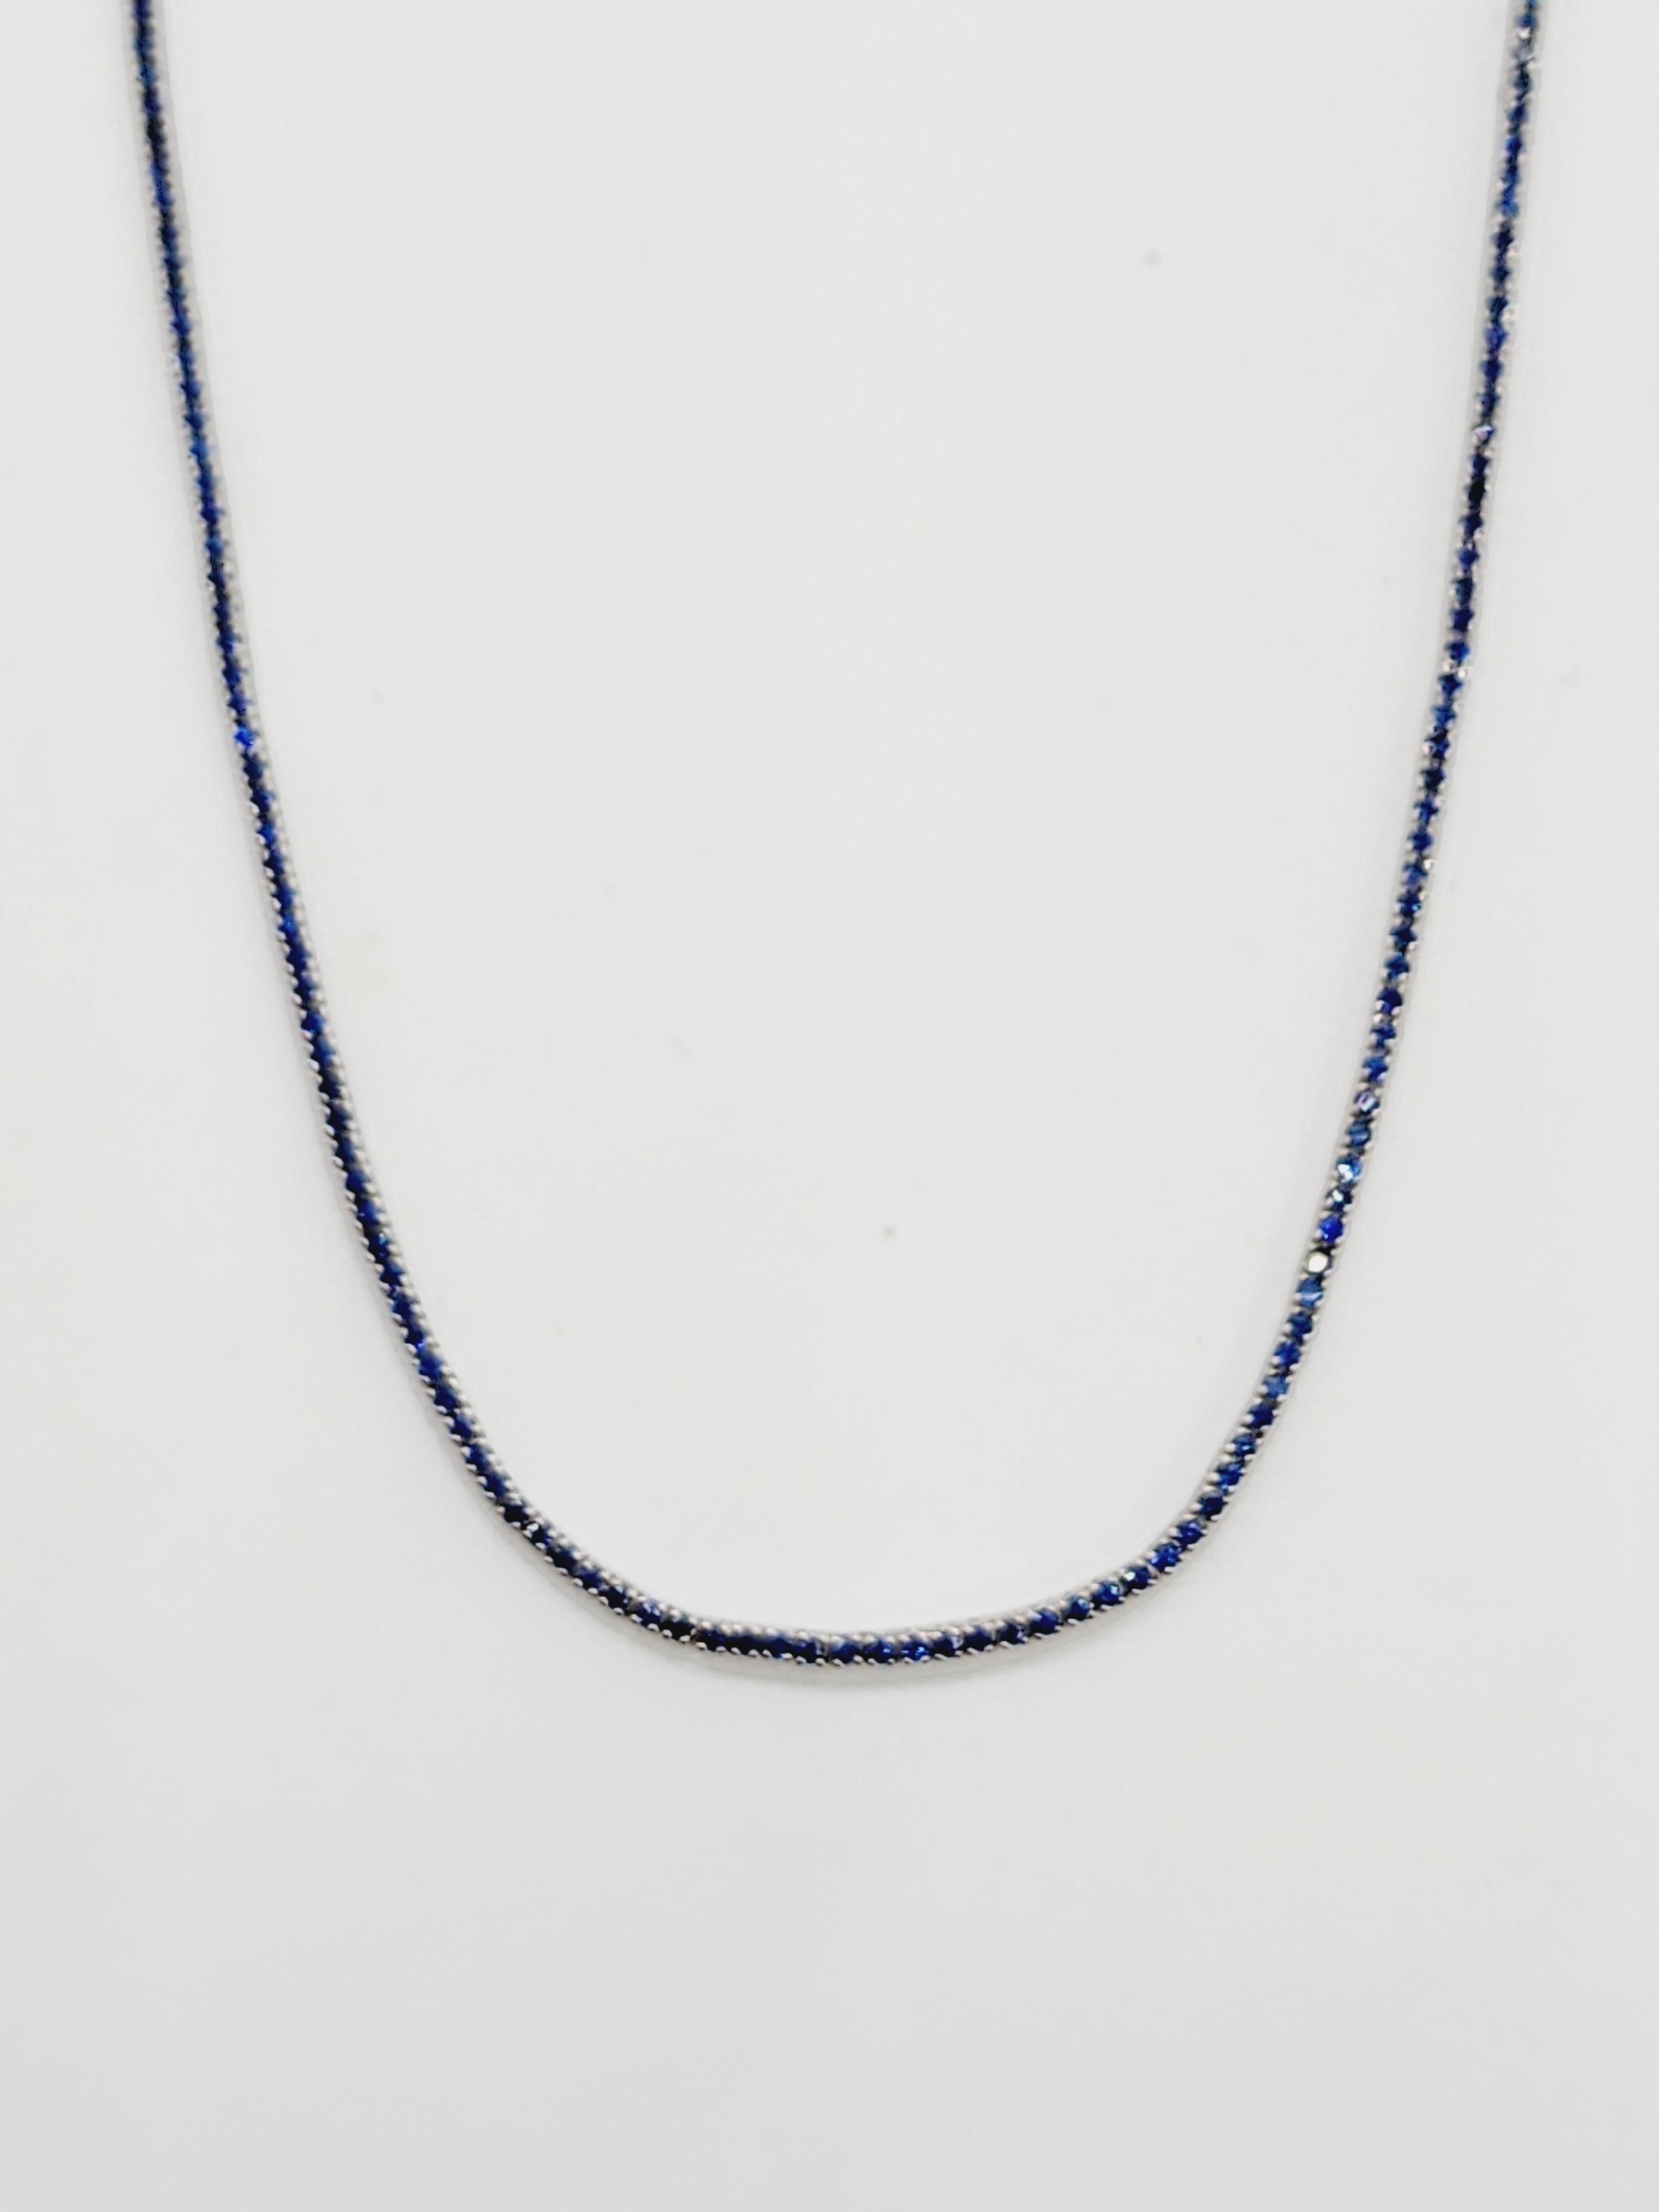 3.80 Carats Sapphire Tennis Necklace 14 Karat White Gold 16'' In New Condition For Sale In Great Neck, NY